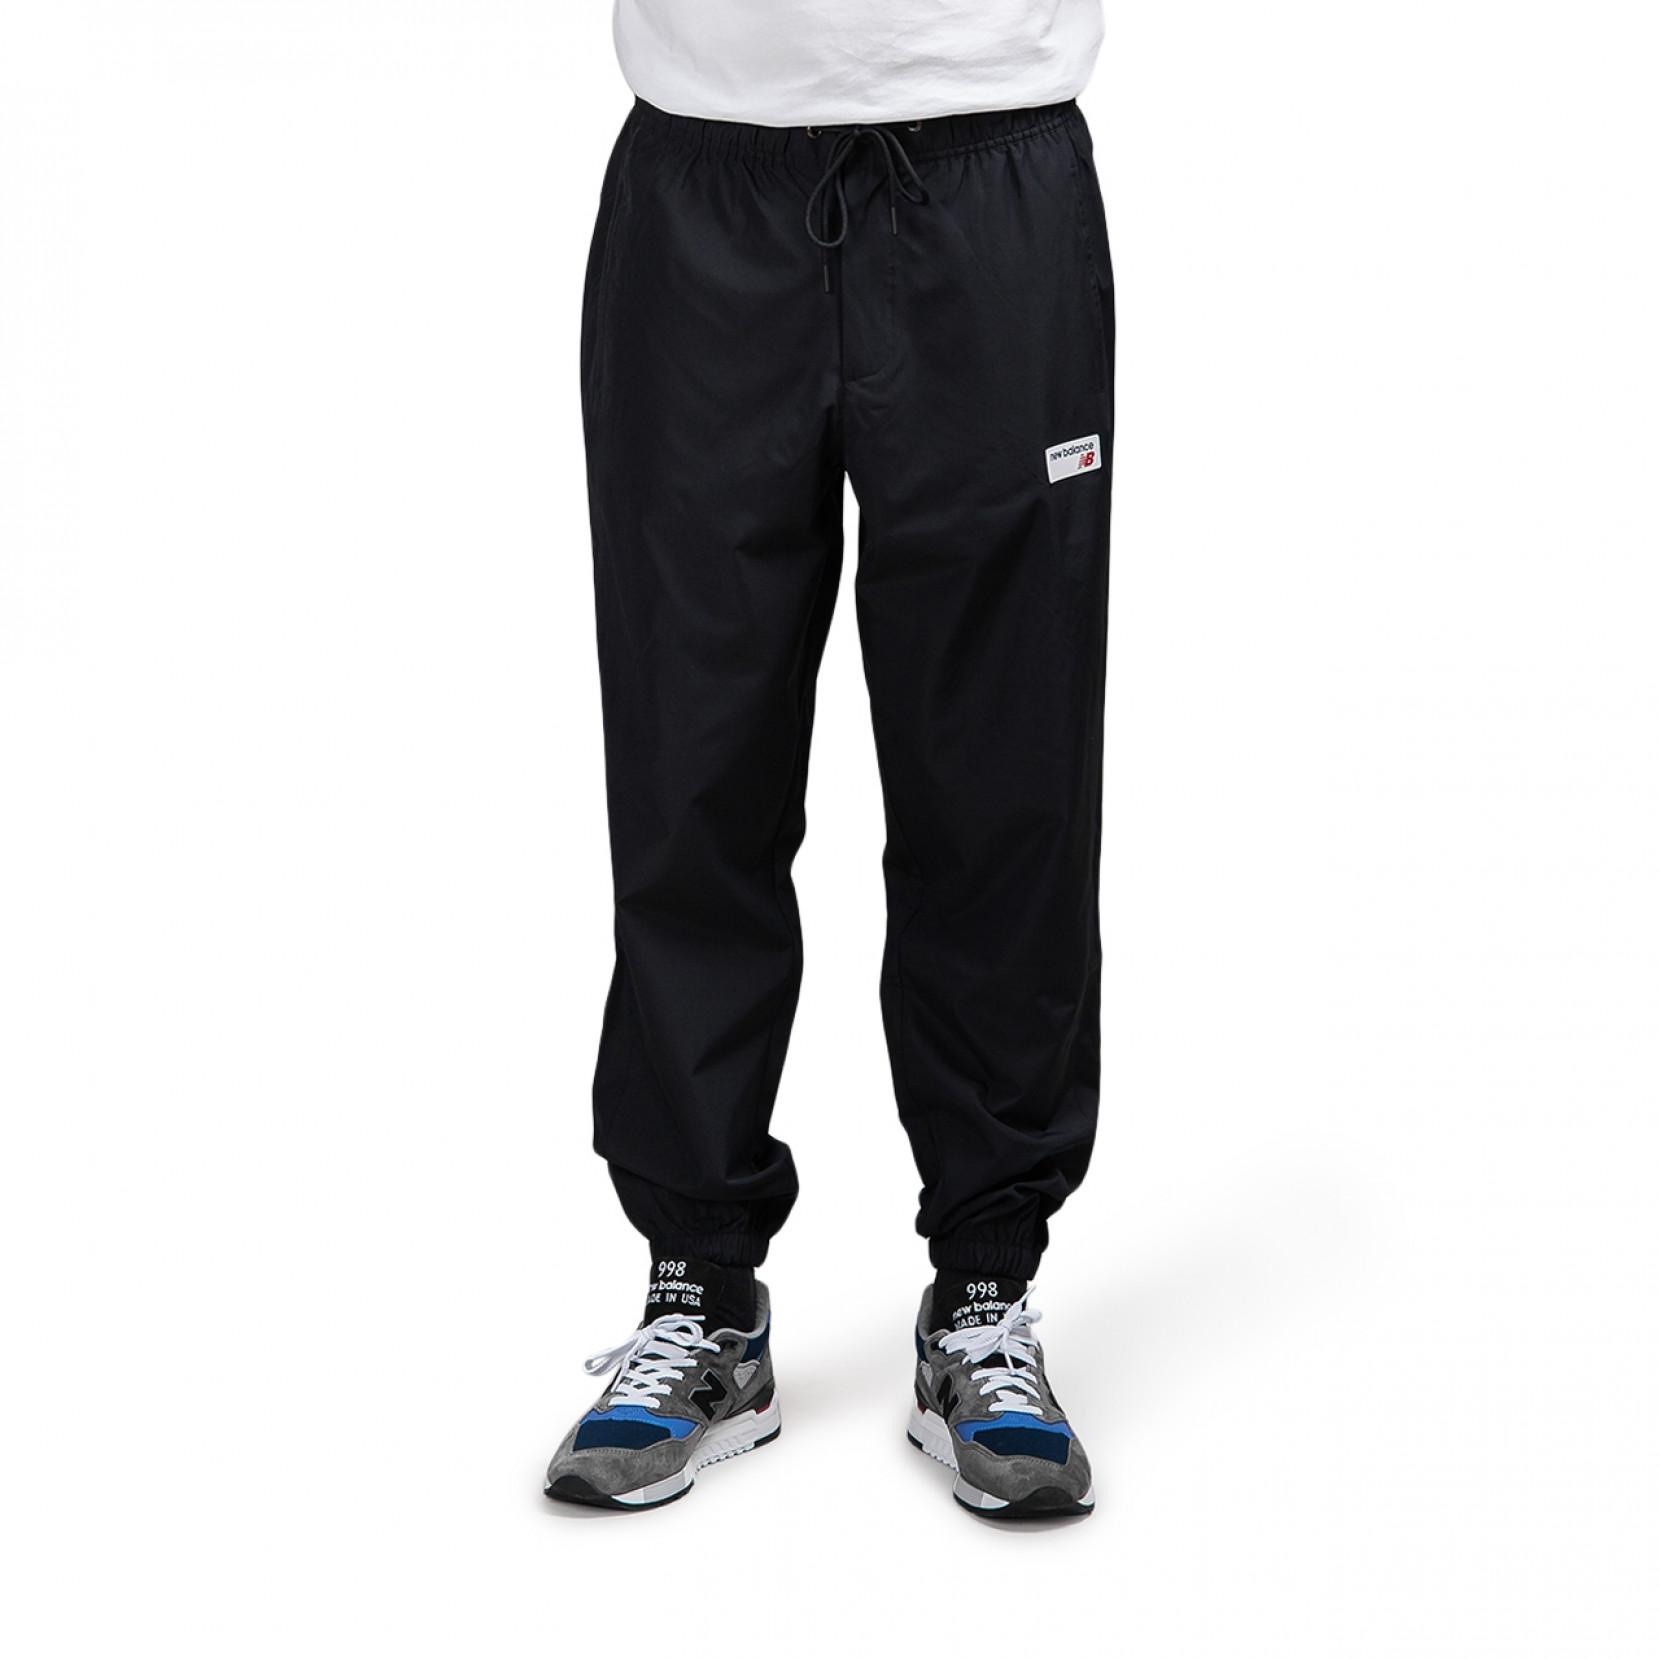 New Balance Synthetic Athletics Windbreaker Pant in Black for Men - Lyst